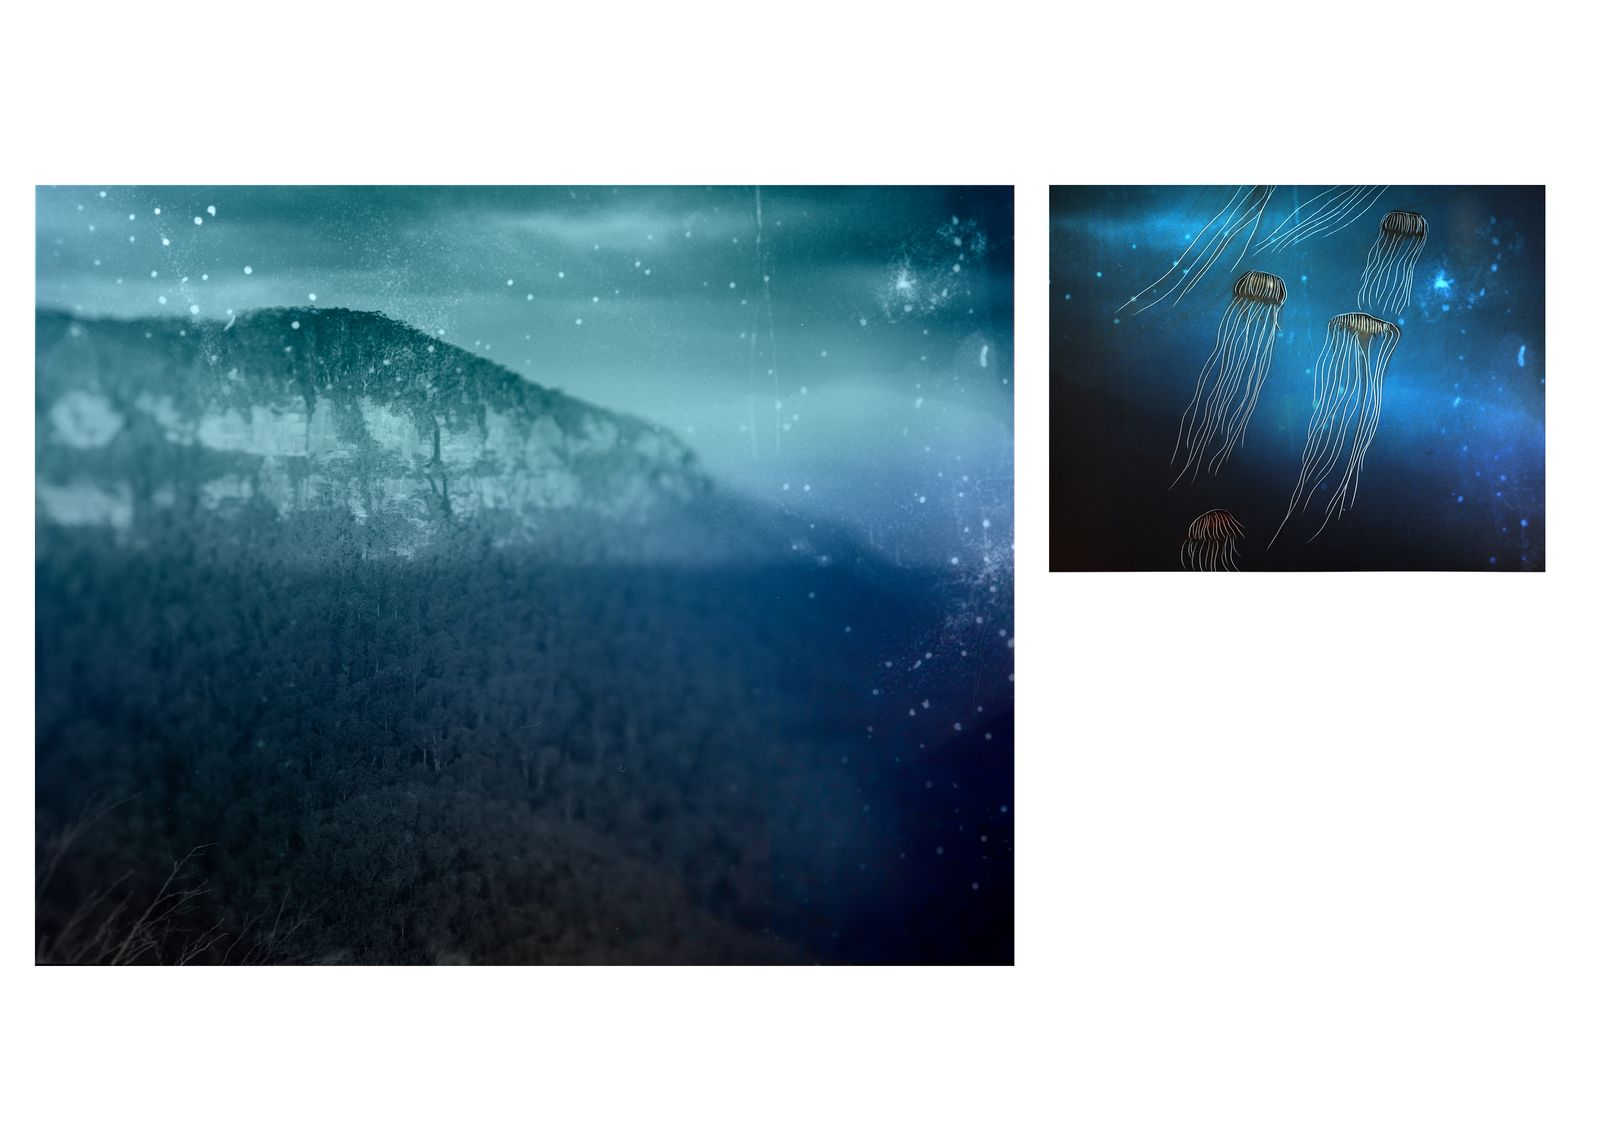 © Aletheia Casey - Image on left: A reimagined scene of the Blue Mountains.Image on right: Jellyfish, Horniman Museum, London.